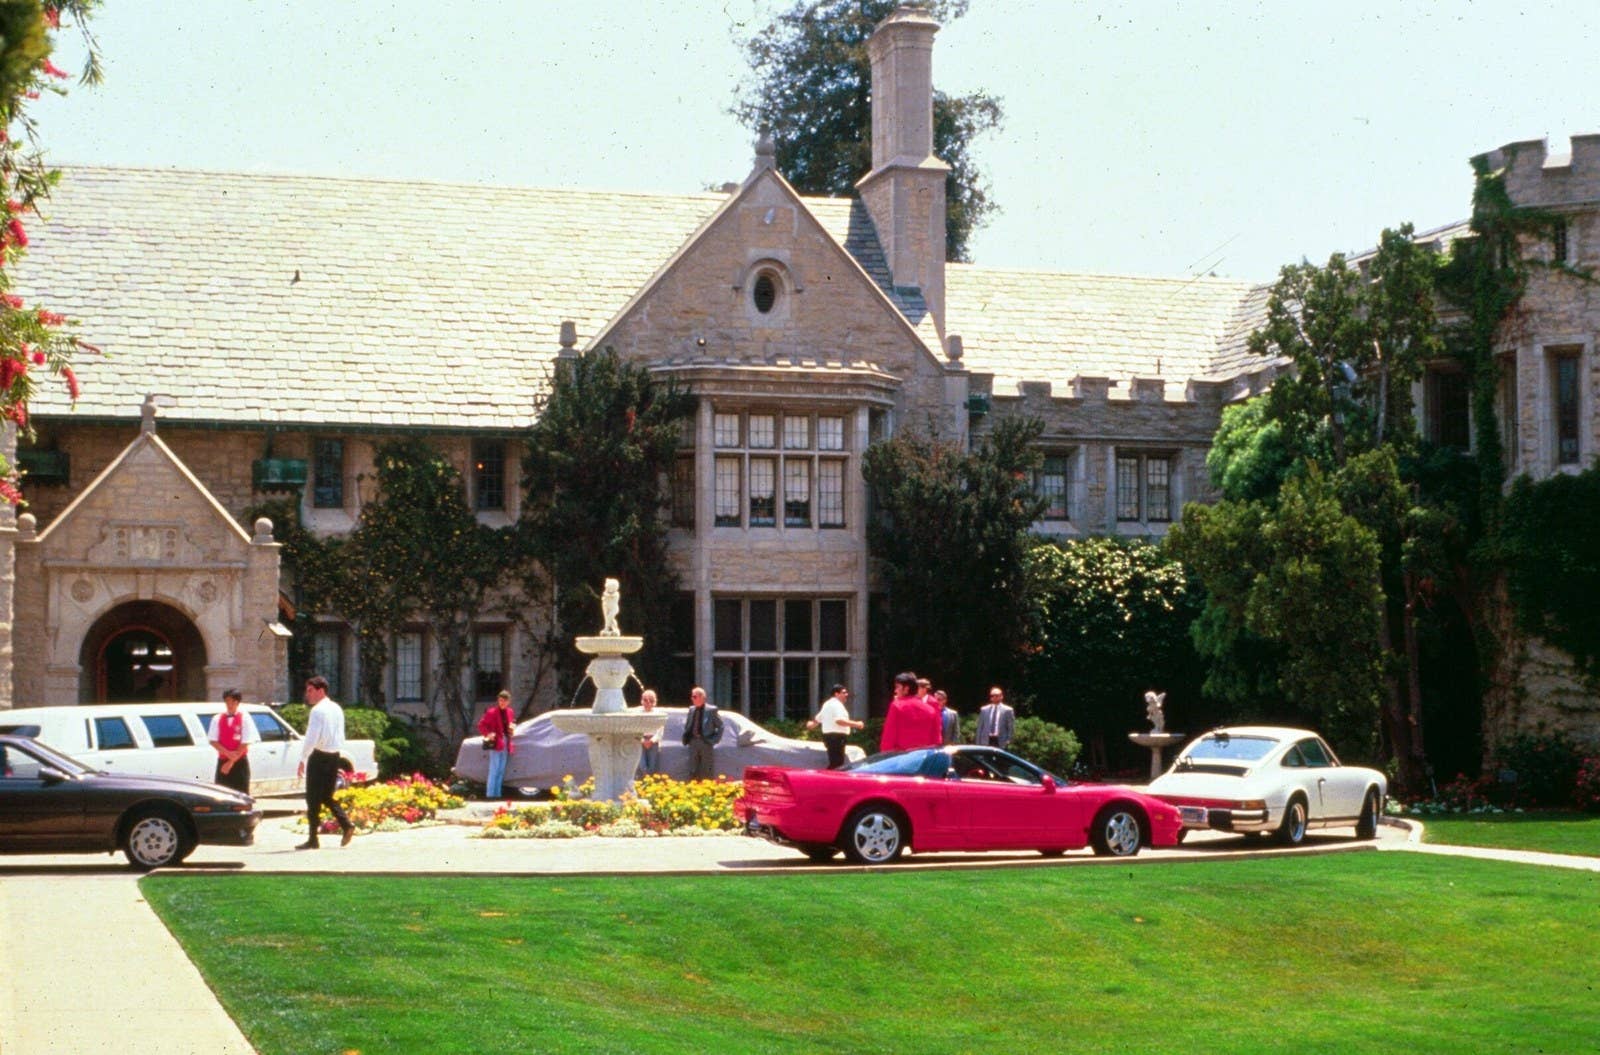 Luxury and high-end sports cars line the driveway of Hefner's Playboy Mansion during a party in 1991.